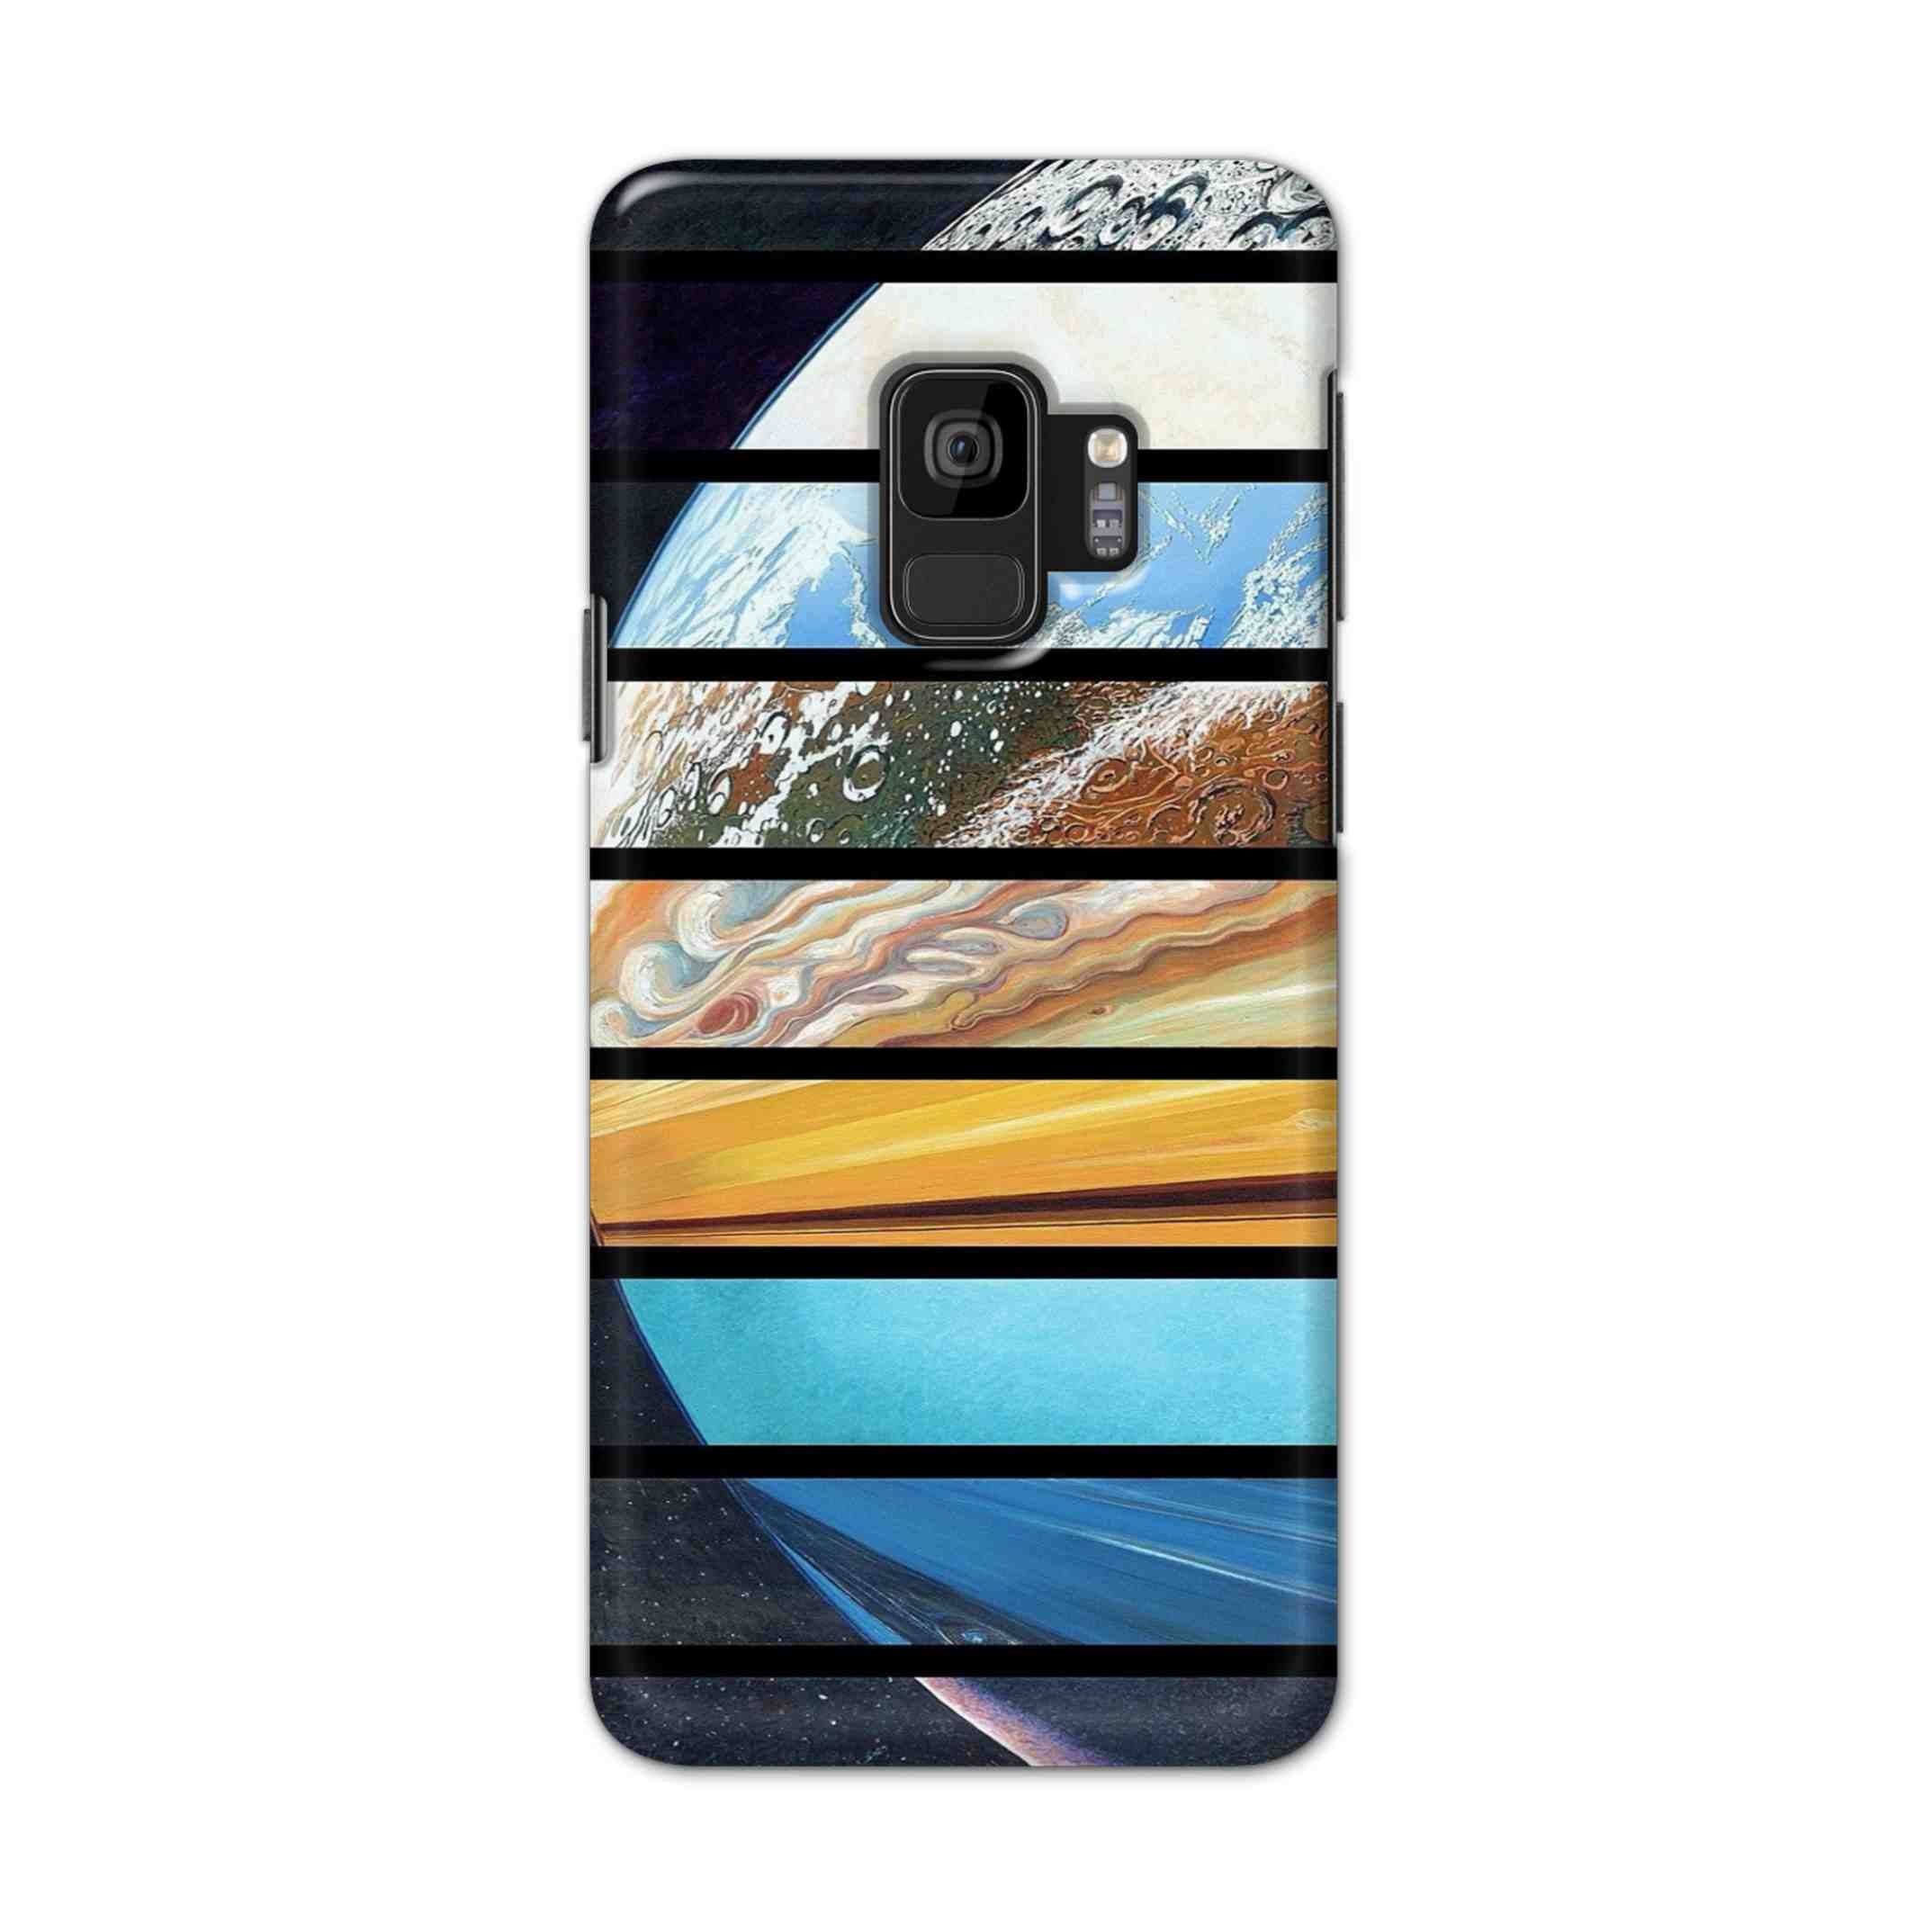 Buy Colourful Earth Hard Back Mobile Phone Case Cover For Samsung S9 Online